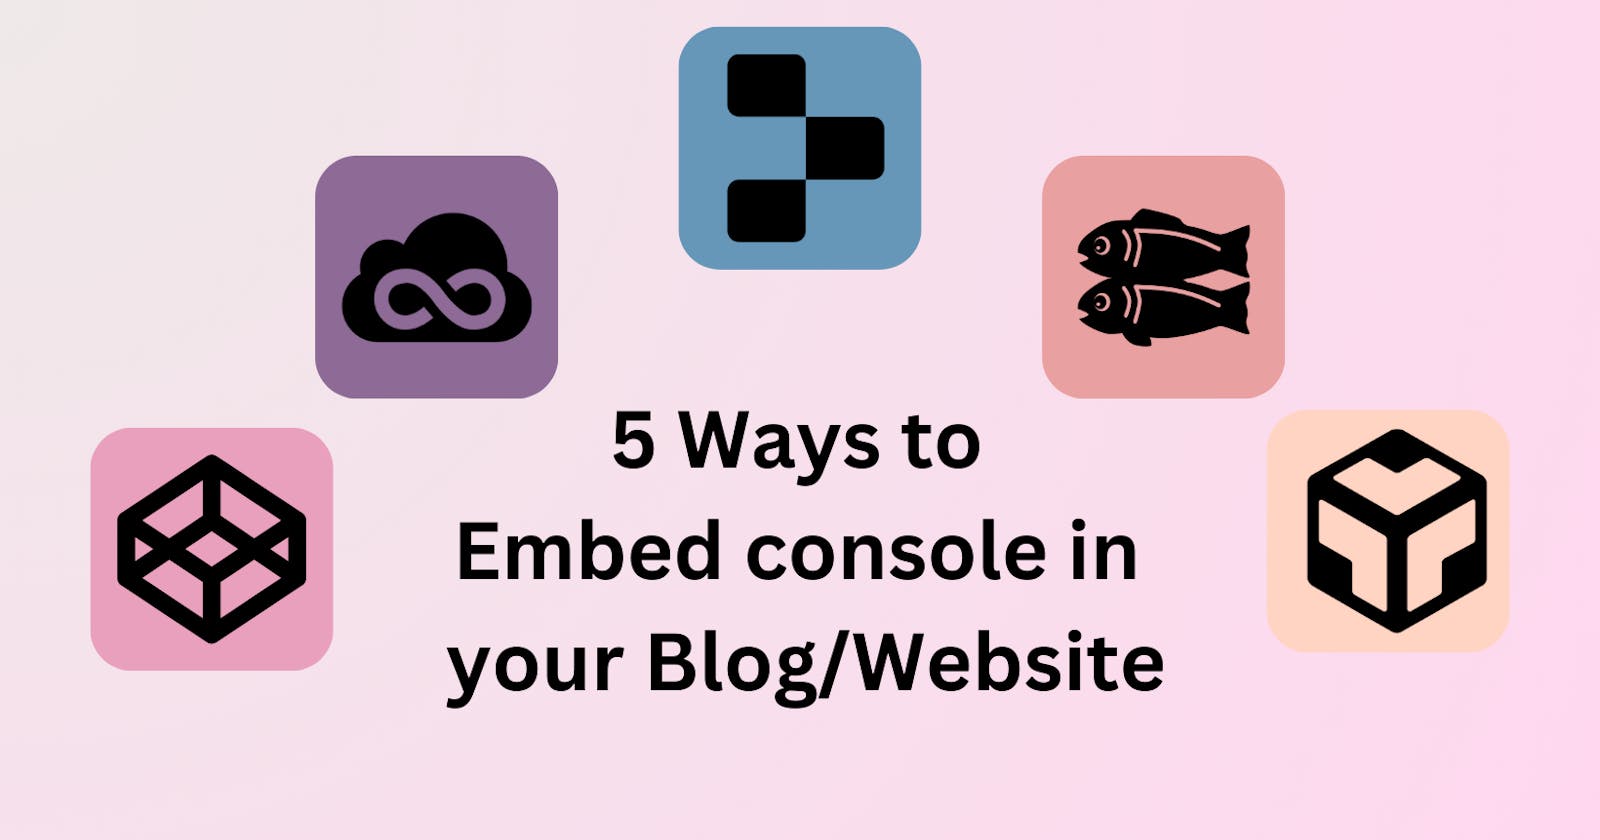 5 Ways to Embed console in your Blog/Website